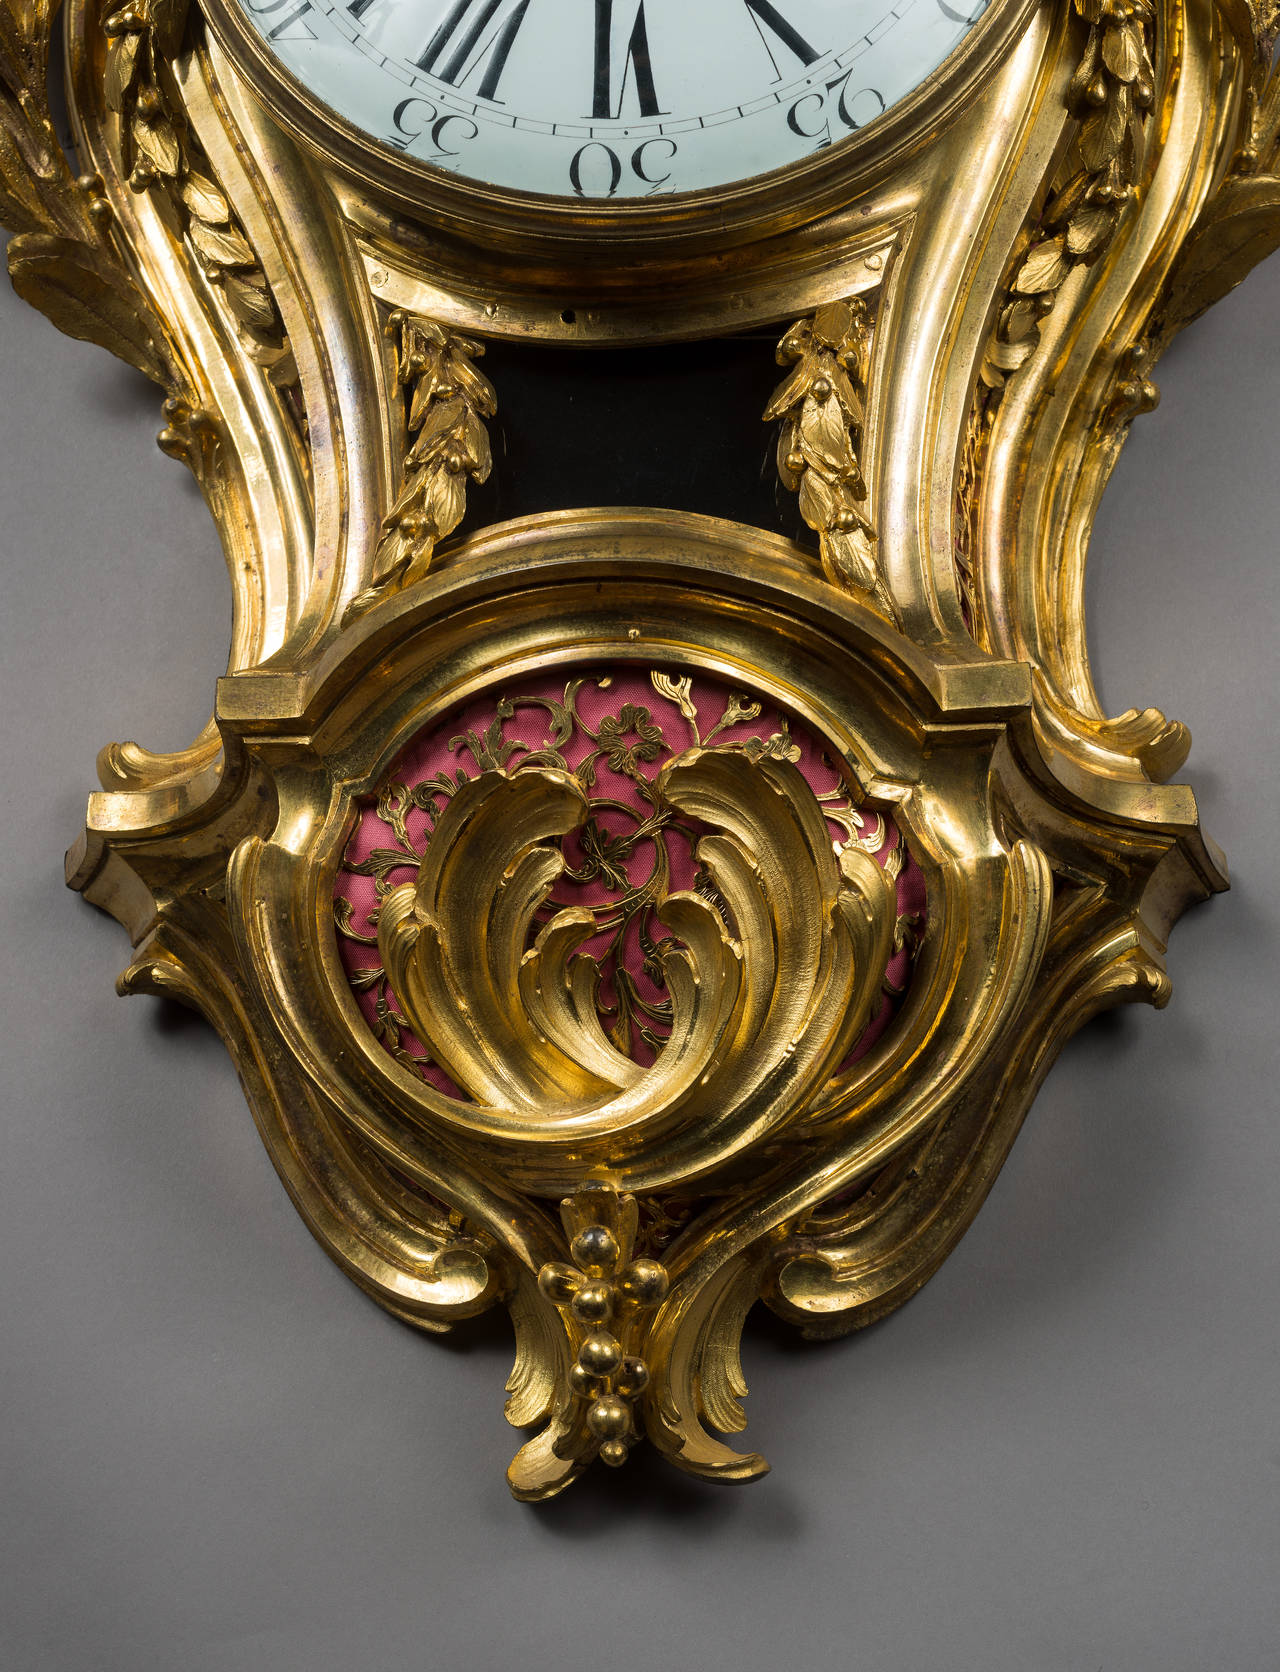 Louis XV Chased Gilt Bronze Wall Cartel by Fieffé, Case Attributed to Saint-Germain